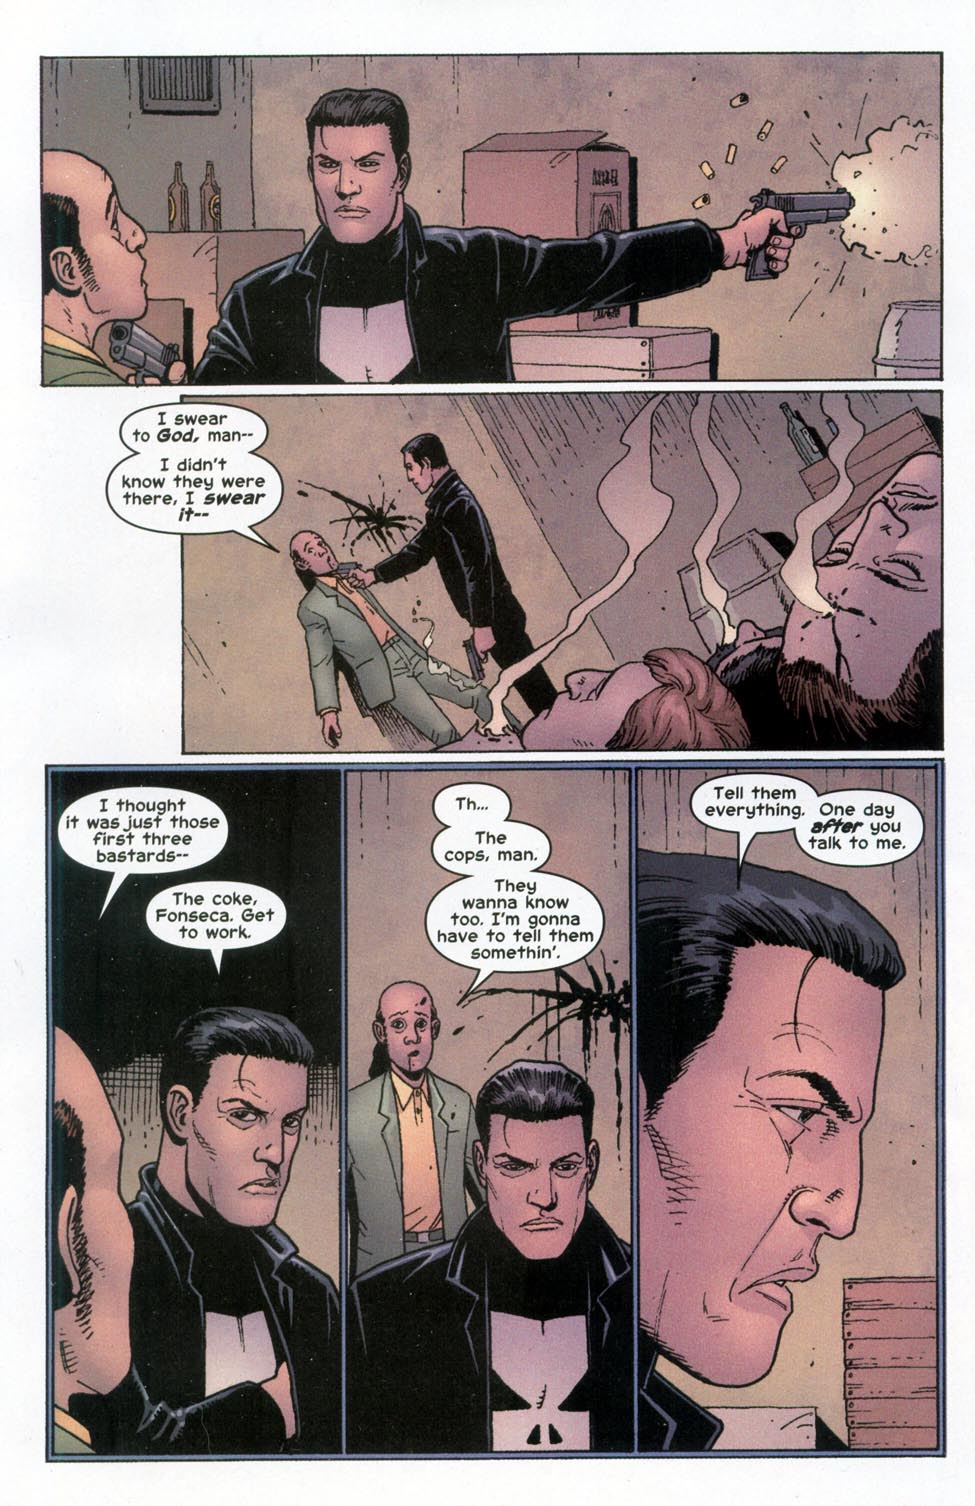 The Punisher (2001) issue 20 - Brotherhood #01 - Page 17